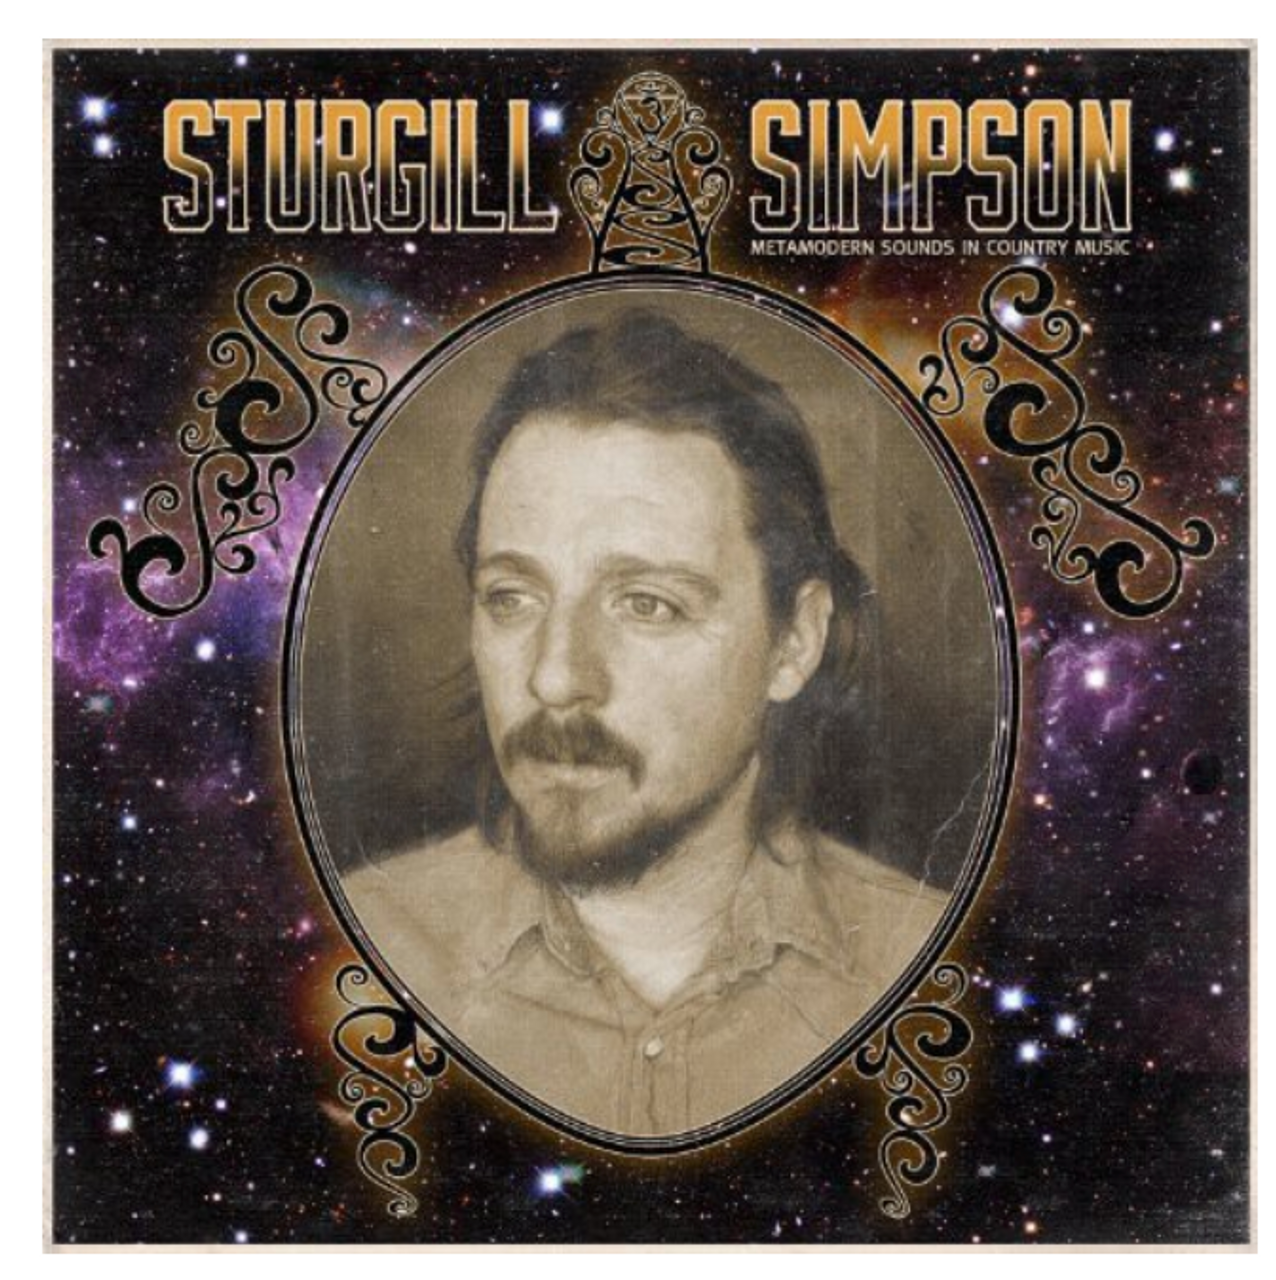 Sturgill Simpson - A Sailor's Guide to Earth (Vinyl)